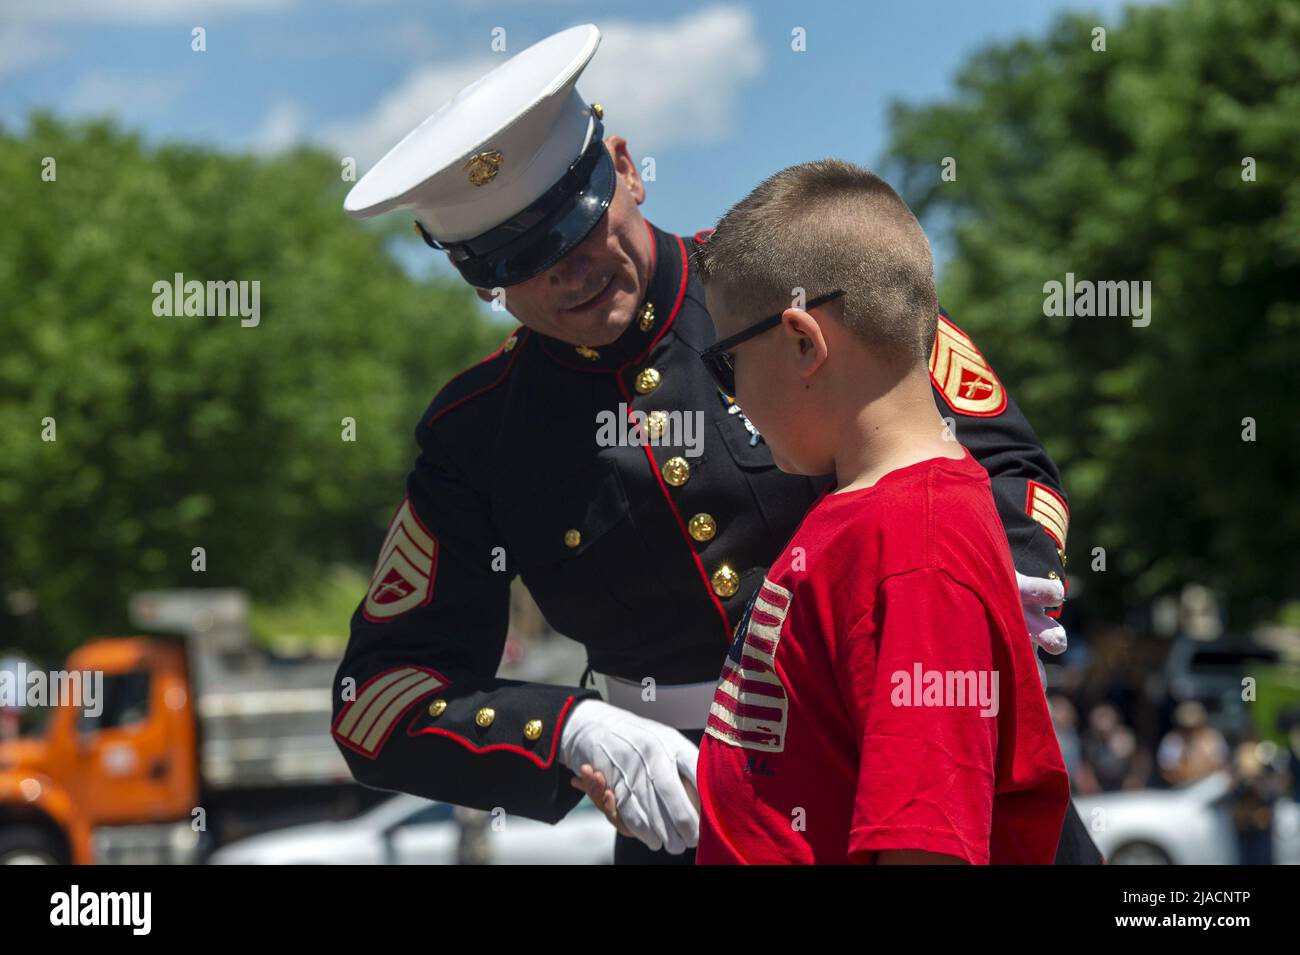 Washington, United States. 29th May, 2022. Staff Sgt. Tim Chambers, known as 'The Saluting Marine', .shakes hands with a boy who helped in saluting the thousands of motorcyclists participating in 'Rolling Thunder,' a demonstration to bring awareness to prisoners of war and military members missing in action, in Washington, DC on Sunday, May 29, 2022. Photo by Bonnie Cash/UPI Credit: UPI/Alamy Live News Stock Photo